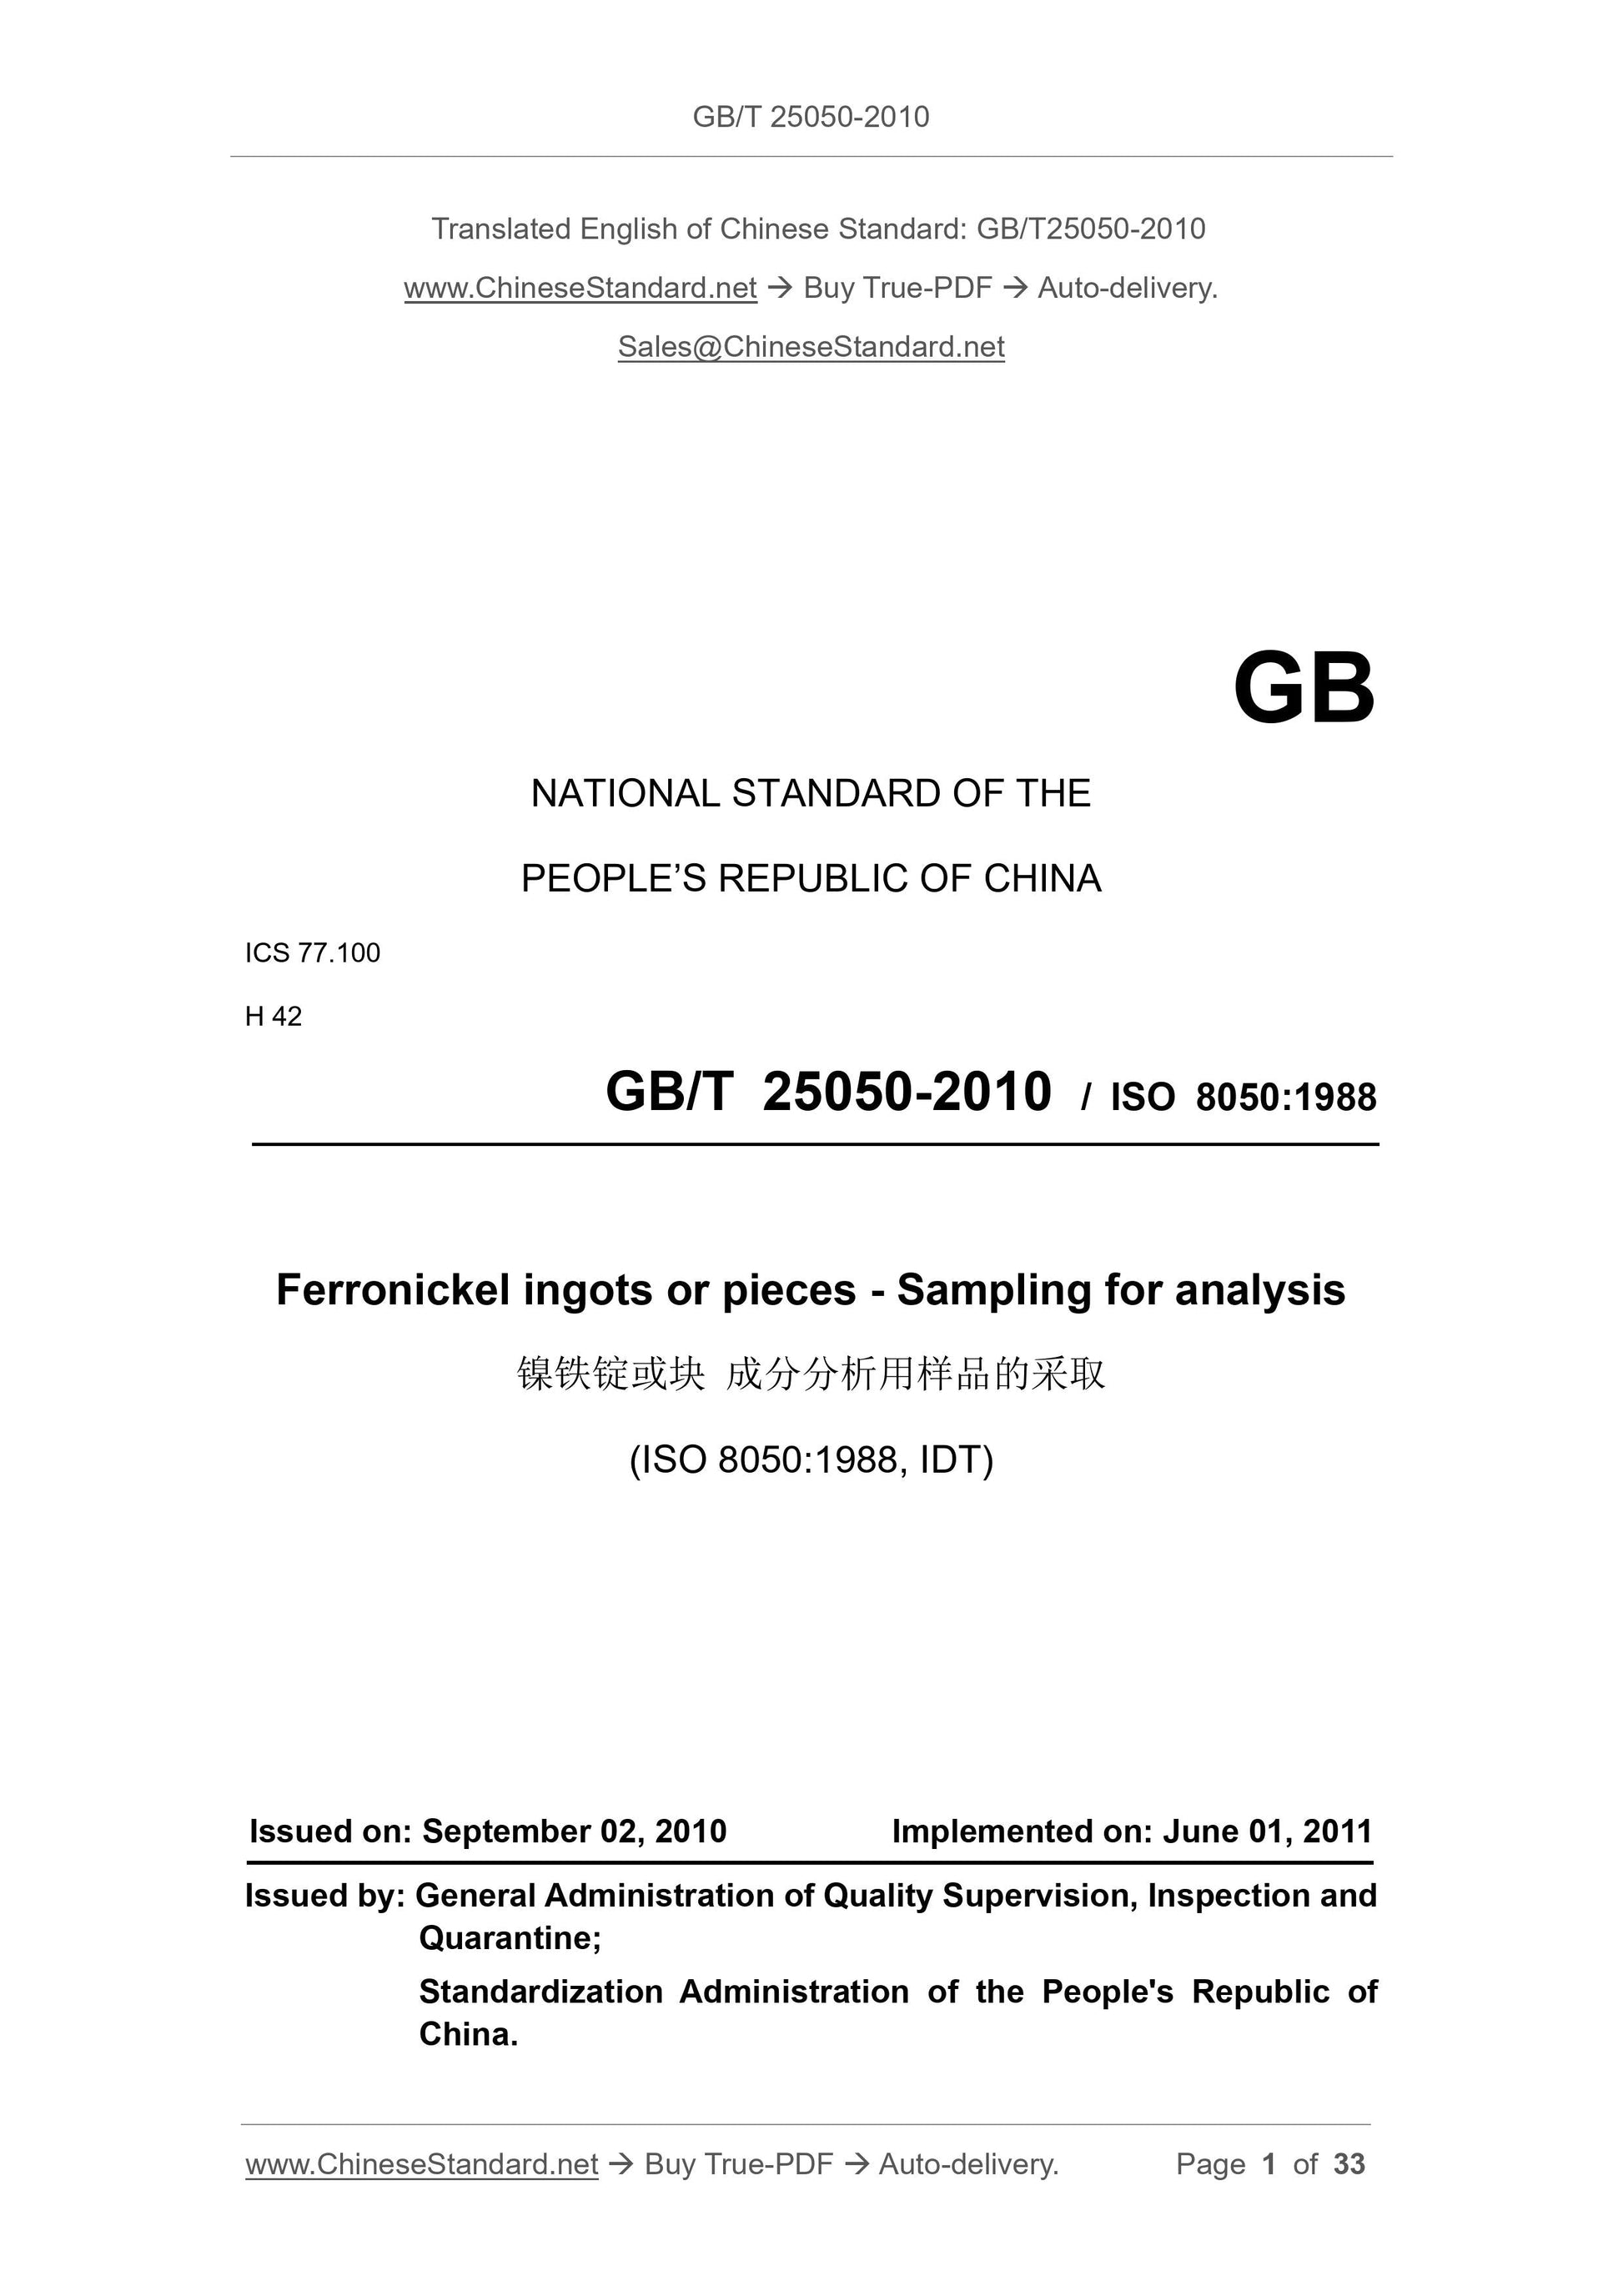 GB/T 25050-2010 Page 1